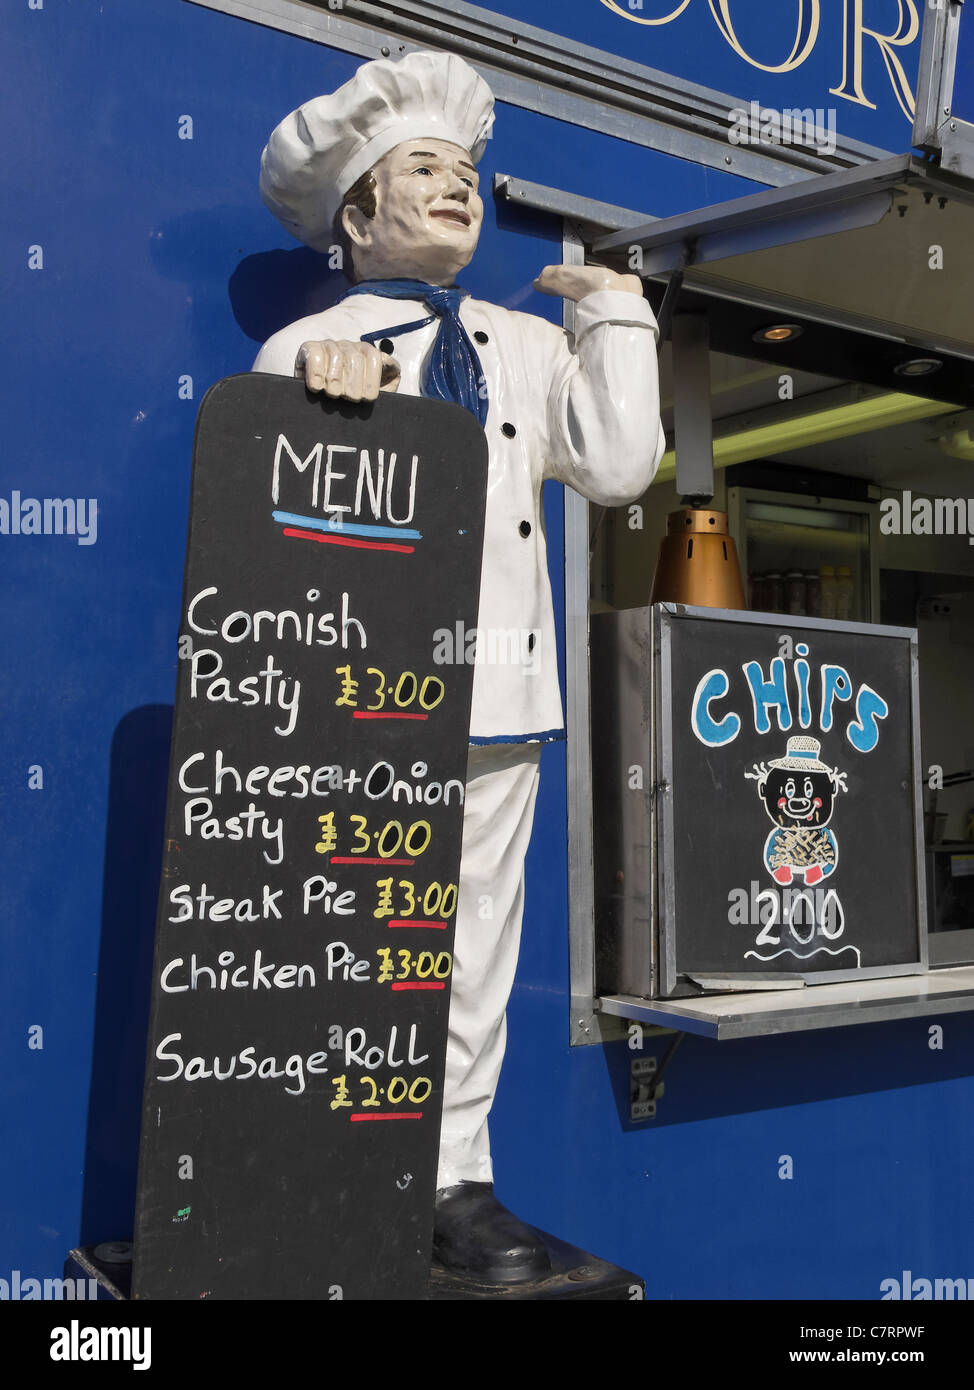 The menu at a Cornish Pasty stall at the Lincolnshire Showground, Lincoln, England. Stock Photo